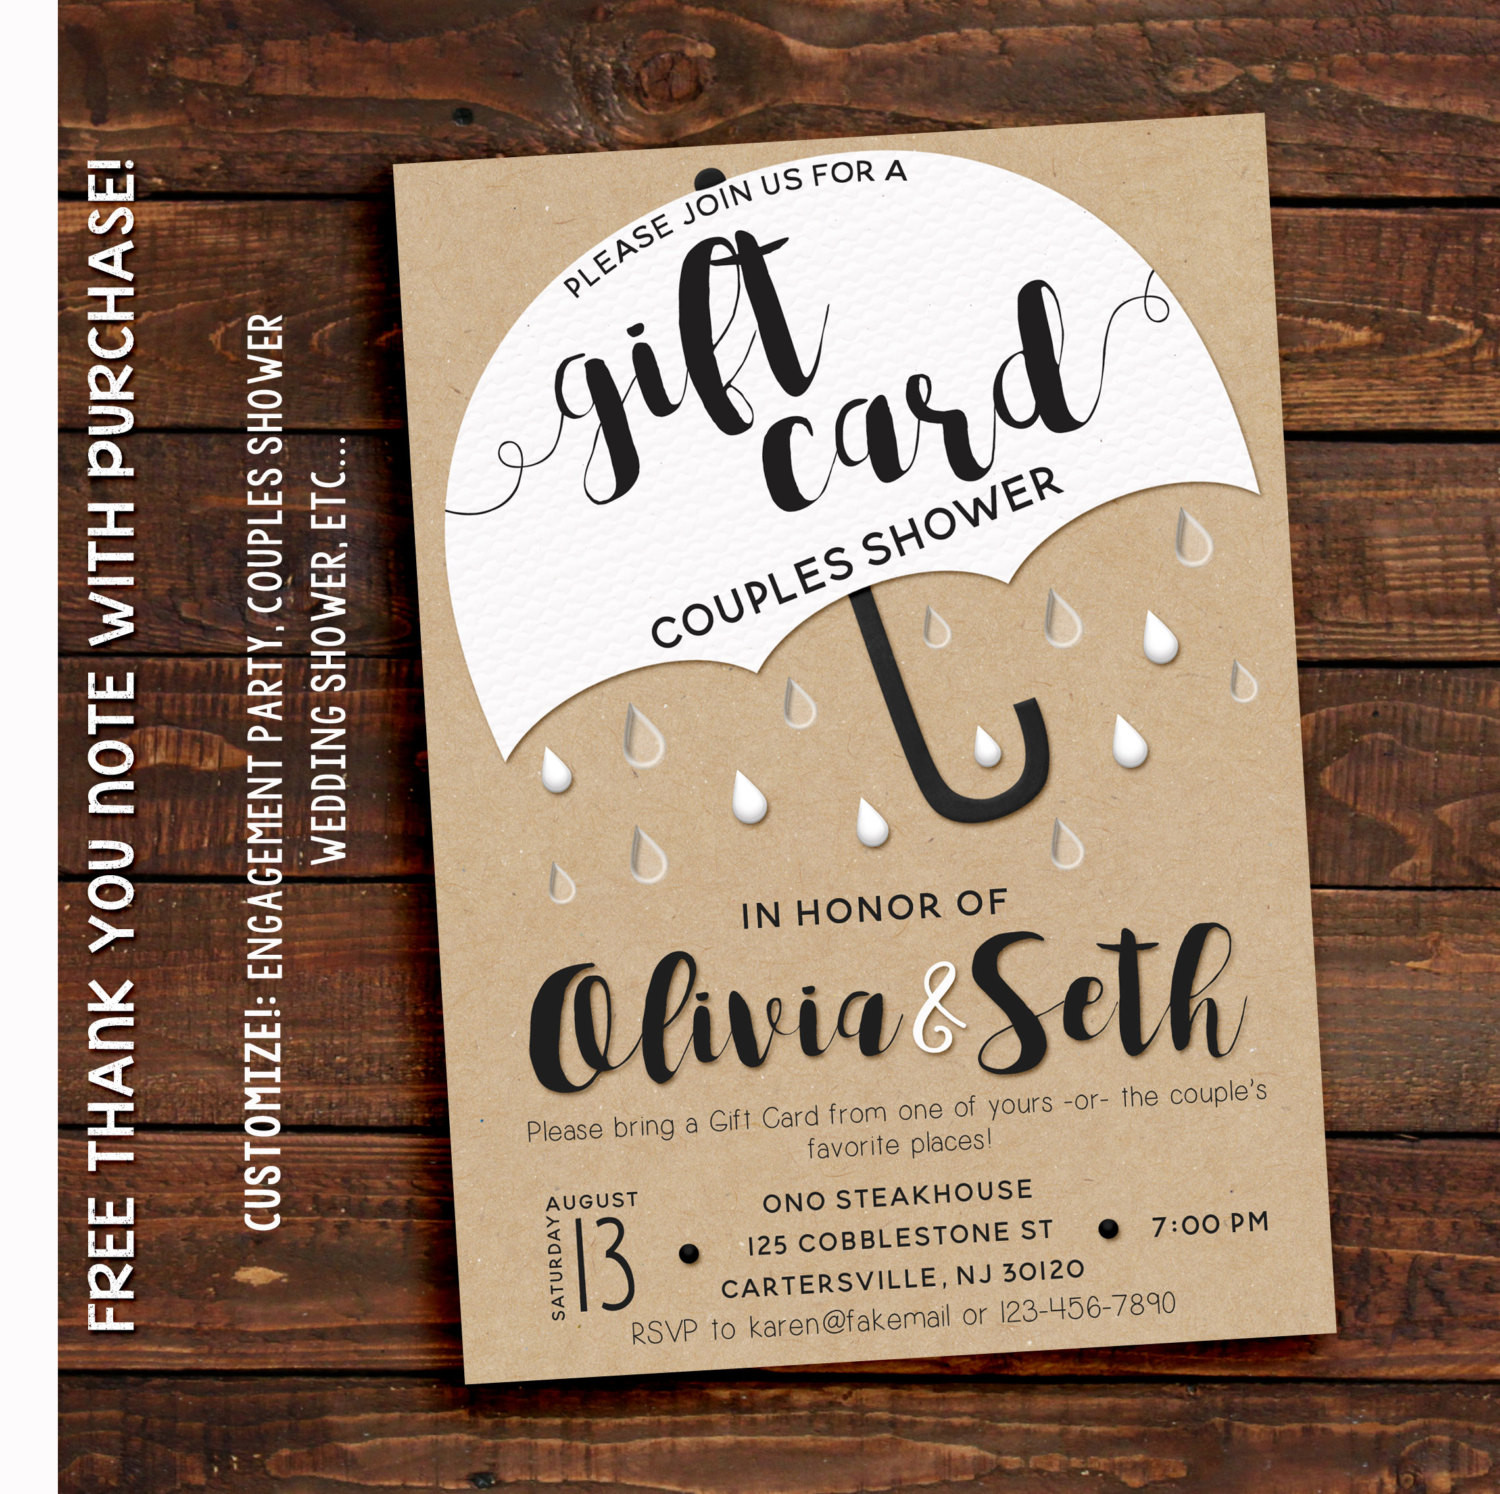 Couples Shower Gift Ideas
 Couples Shower Invitation Couples Shower Invitation